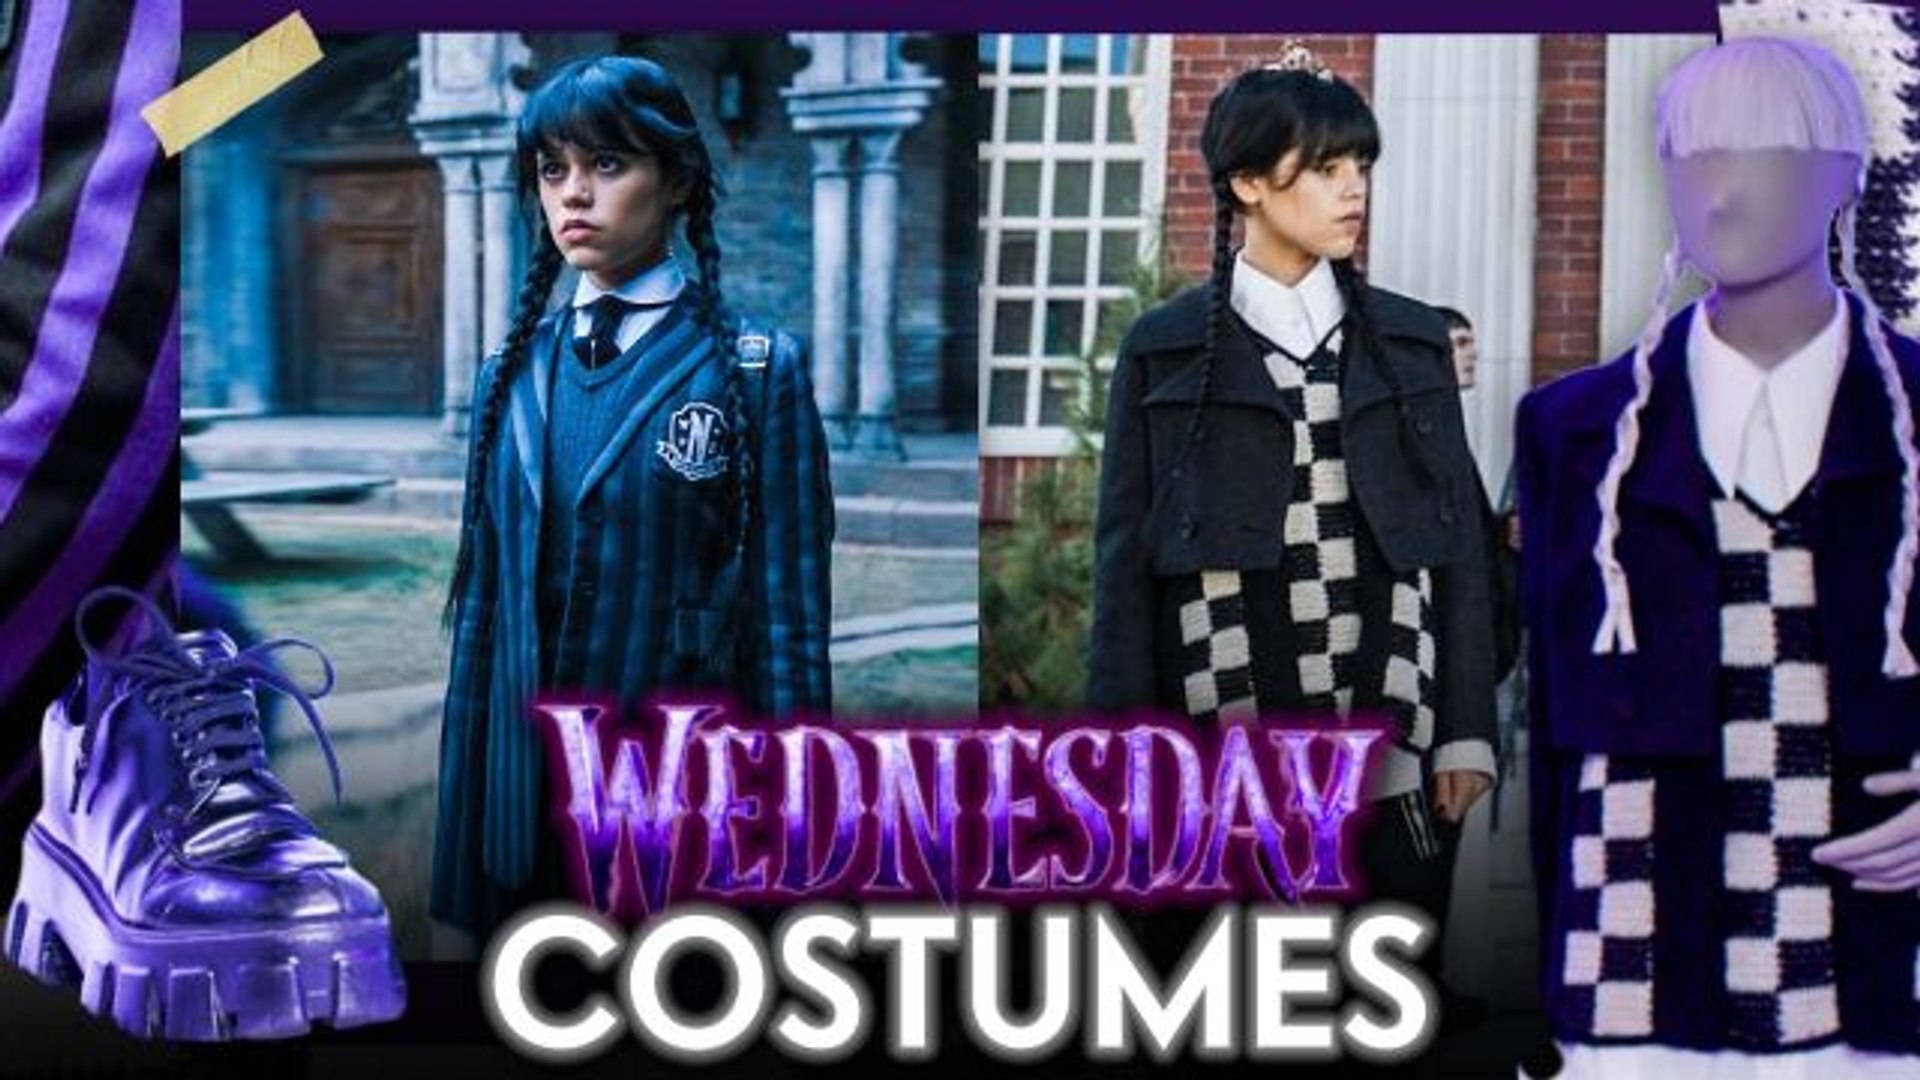 Wednesday' Costume Designer Colleen Atwood Shares Details on the Show